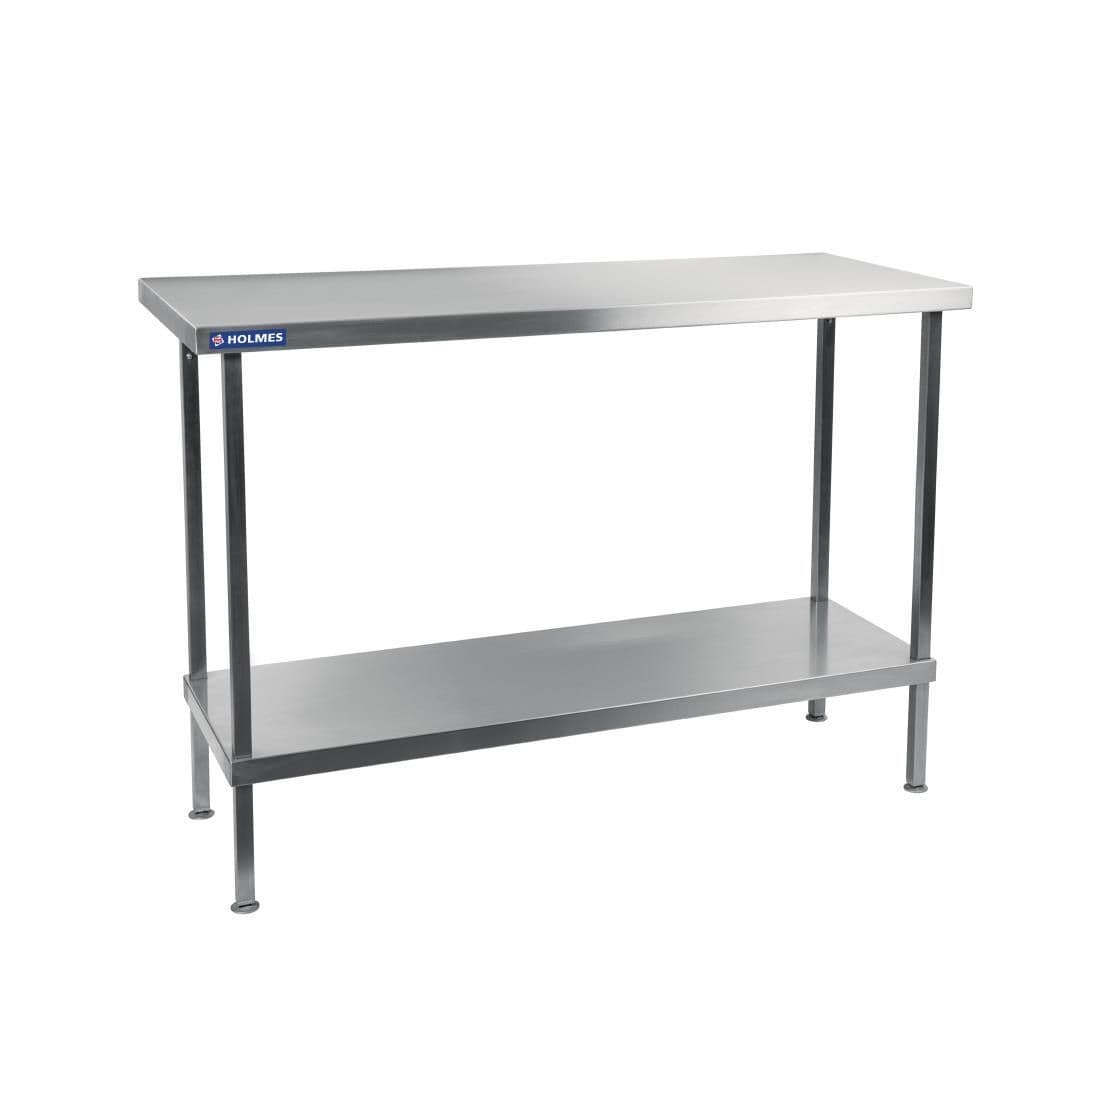 DR048 Holmes Stainless Steel Centre Table 600mm JD Catering Equipment Solutions Ltd